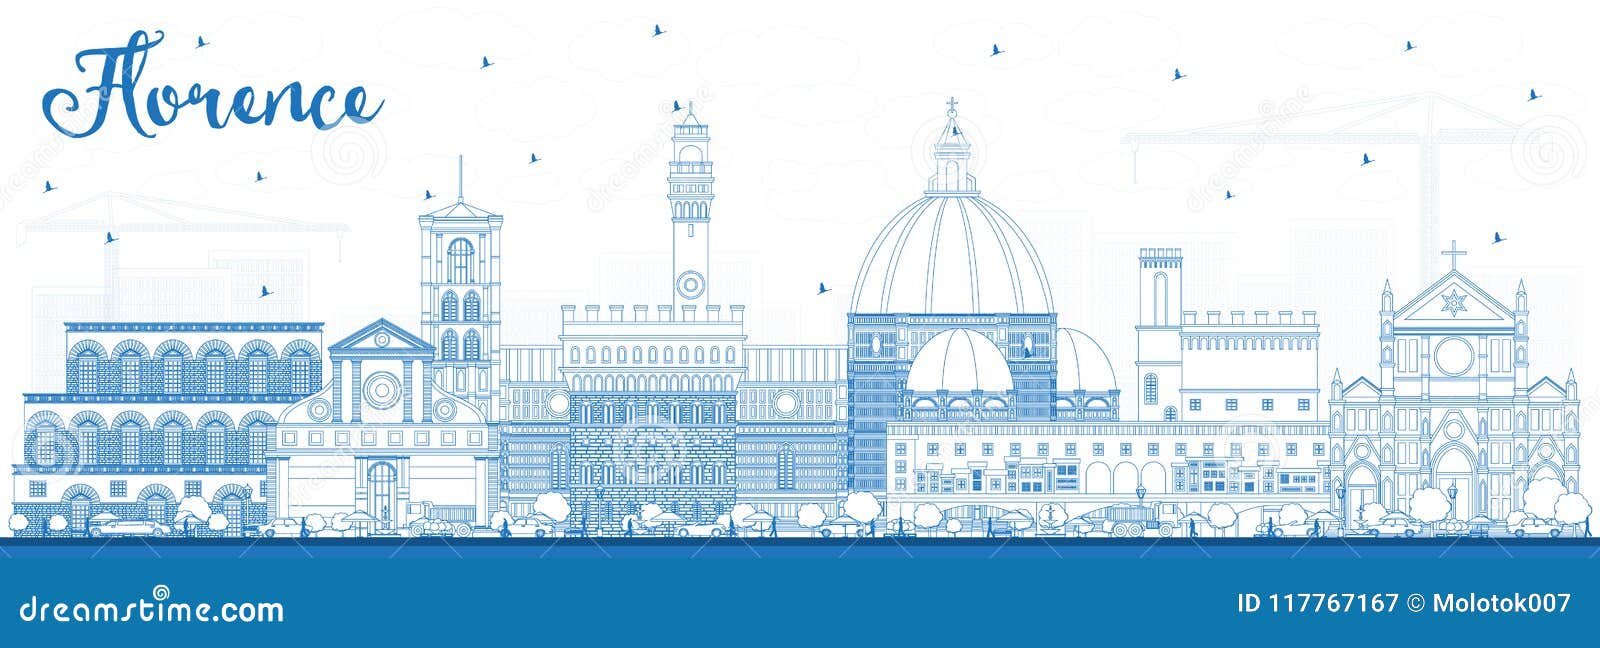 outline florence italy city skyline with blue buildings.